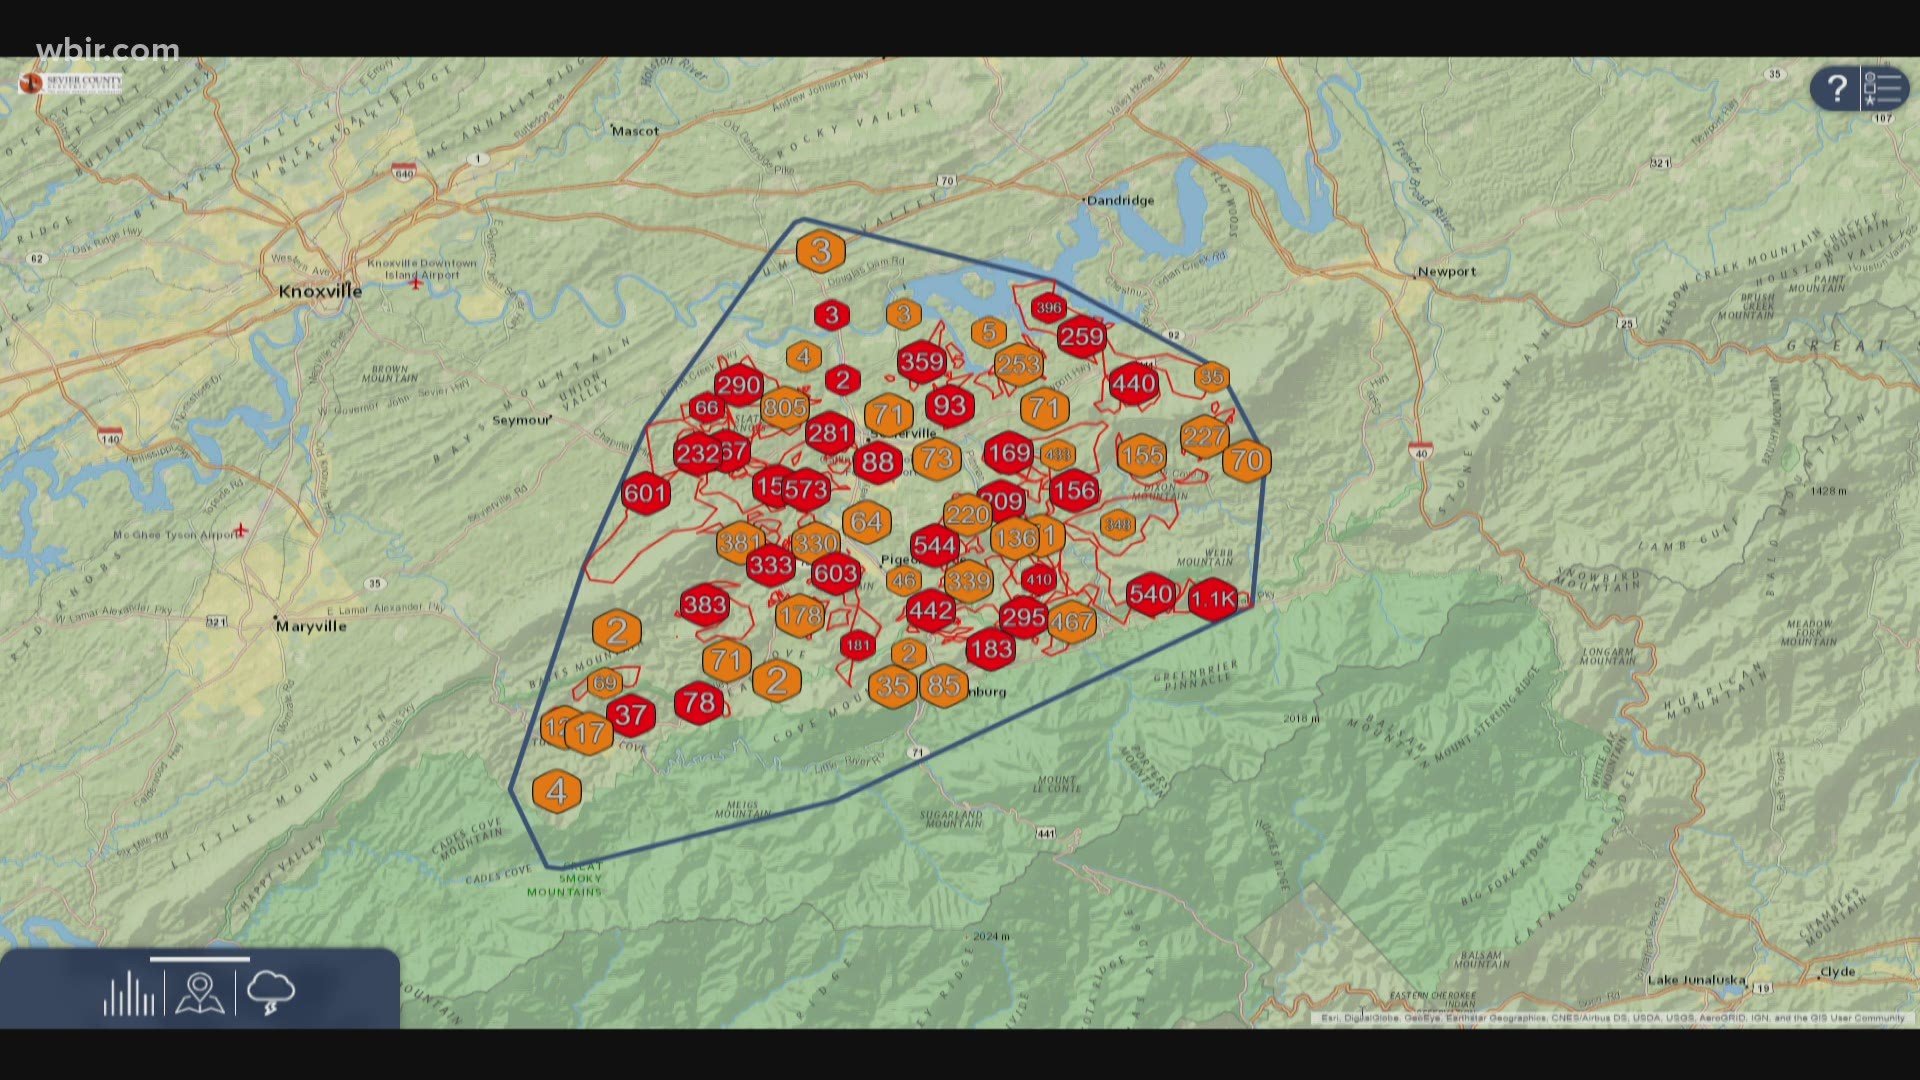 Power outages across East Tennessee